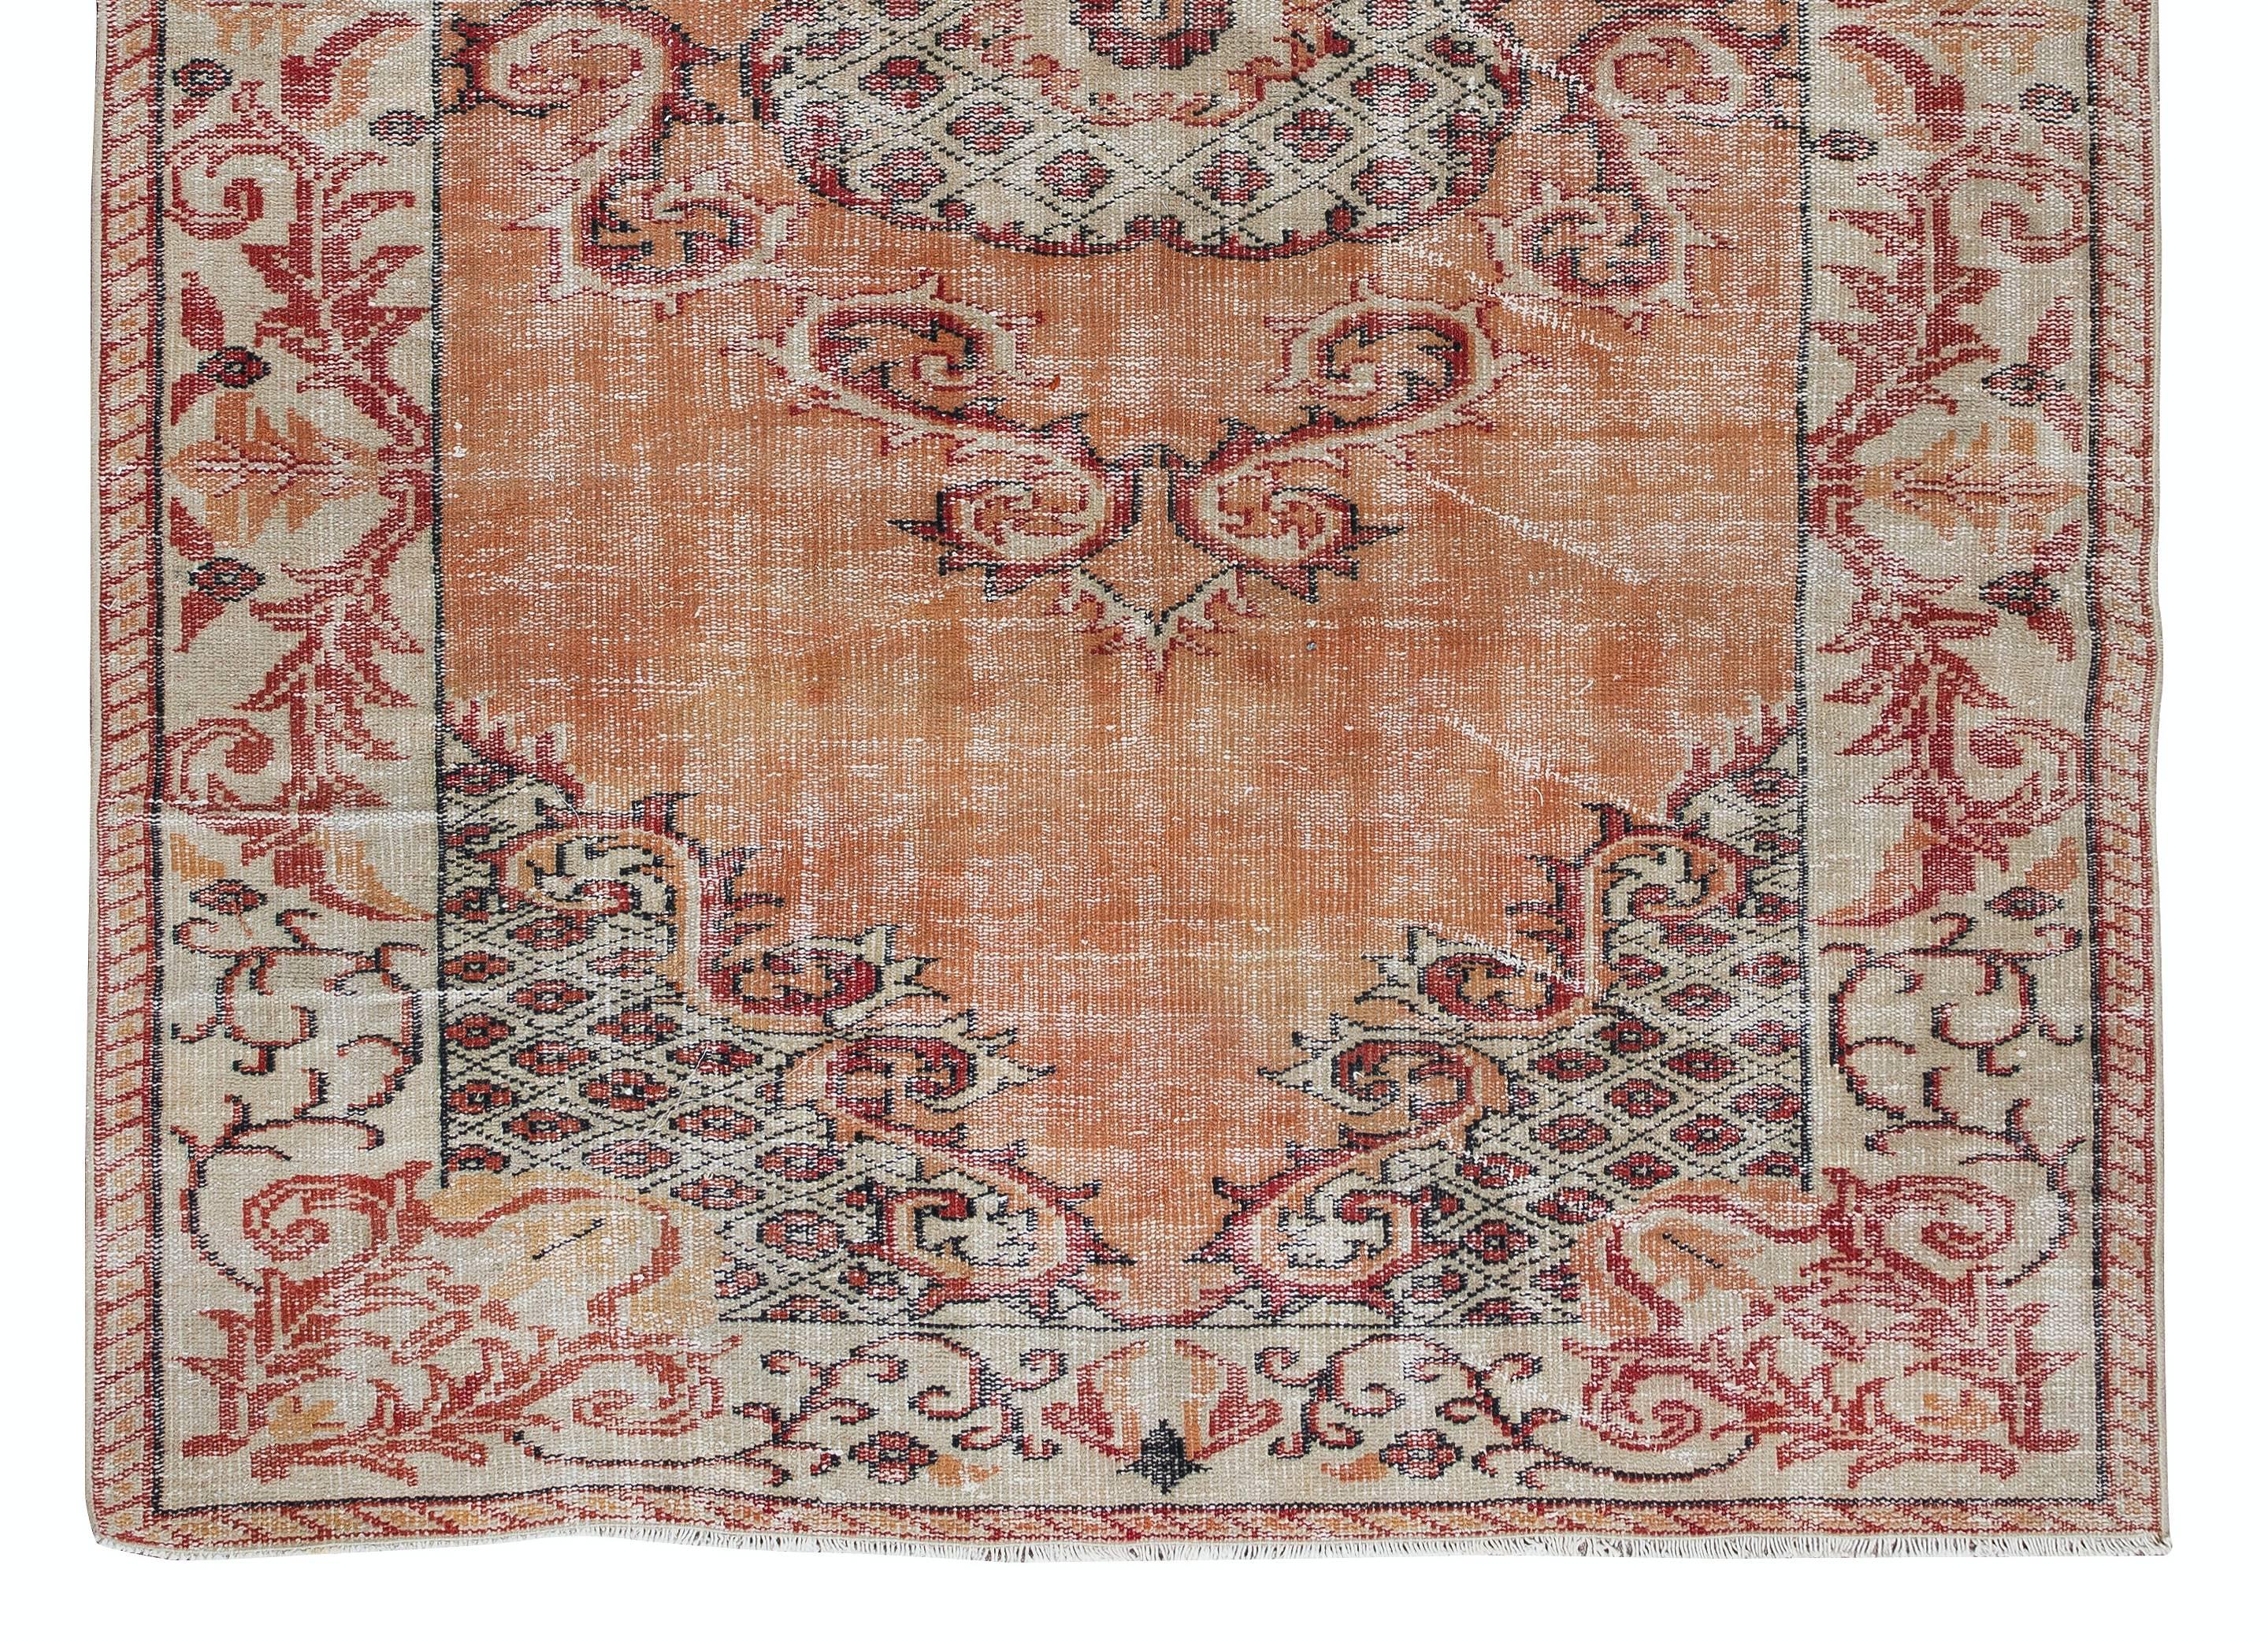 Hand-Knotted 6x8.7 Ft Hand Knotted Orange Area Rug, Vintage Wool Carpet From Turkey For Sale